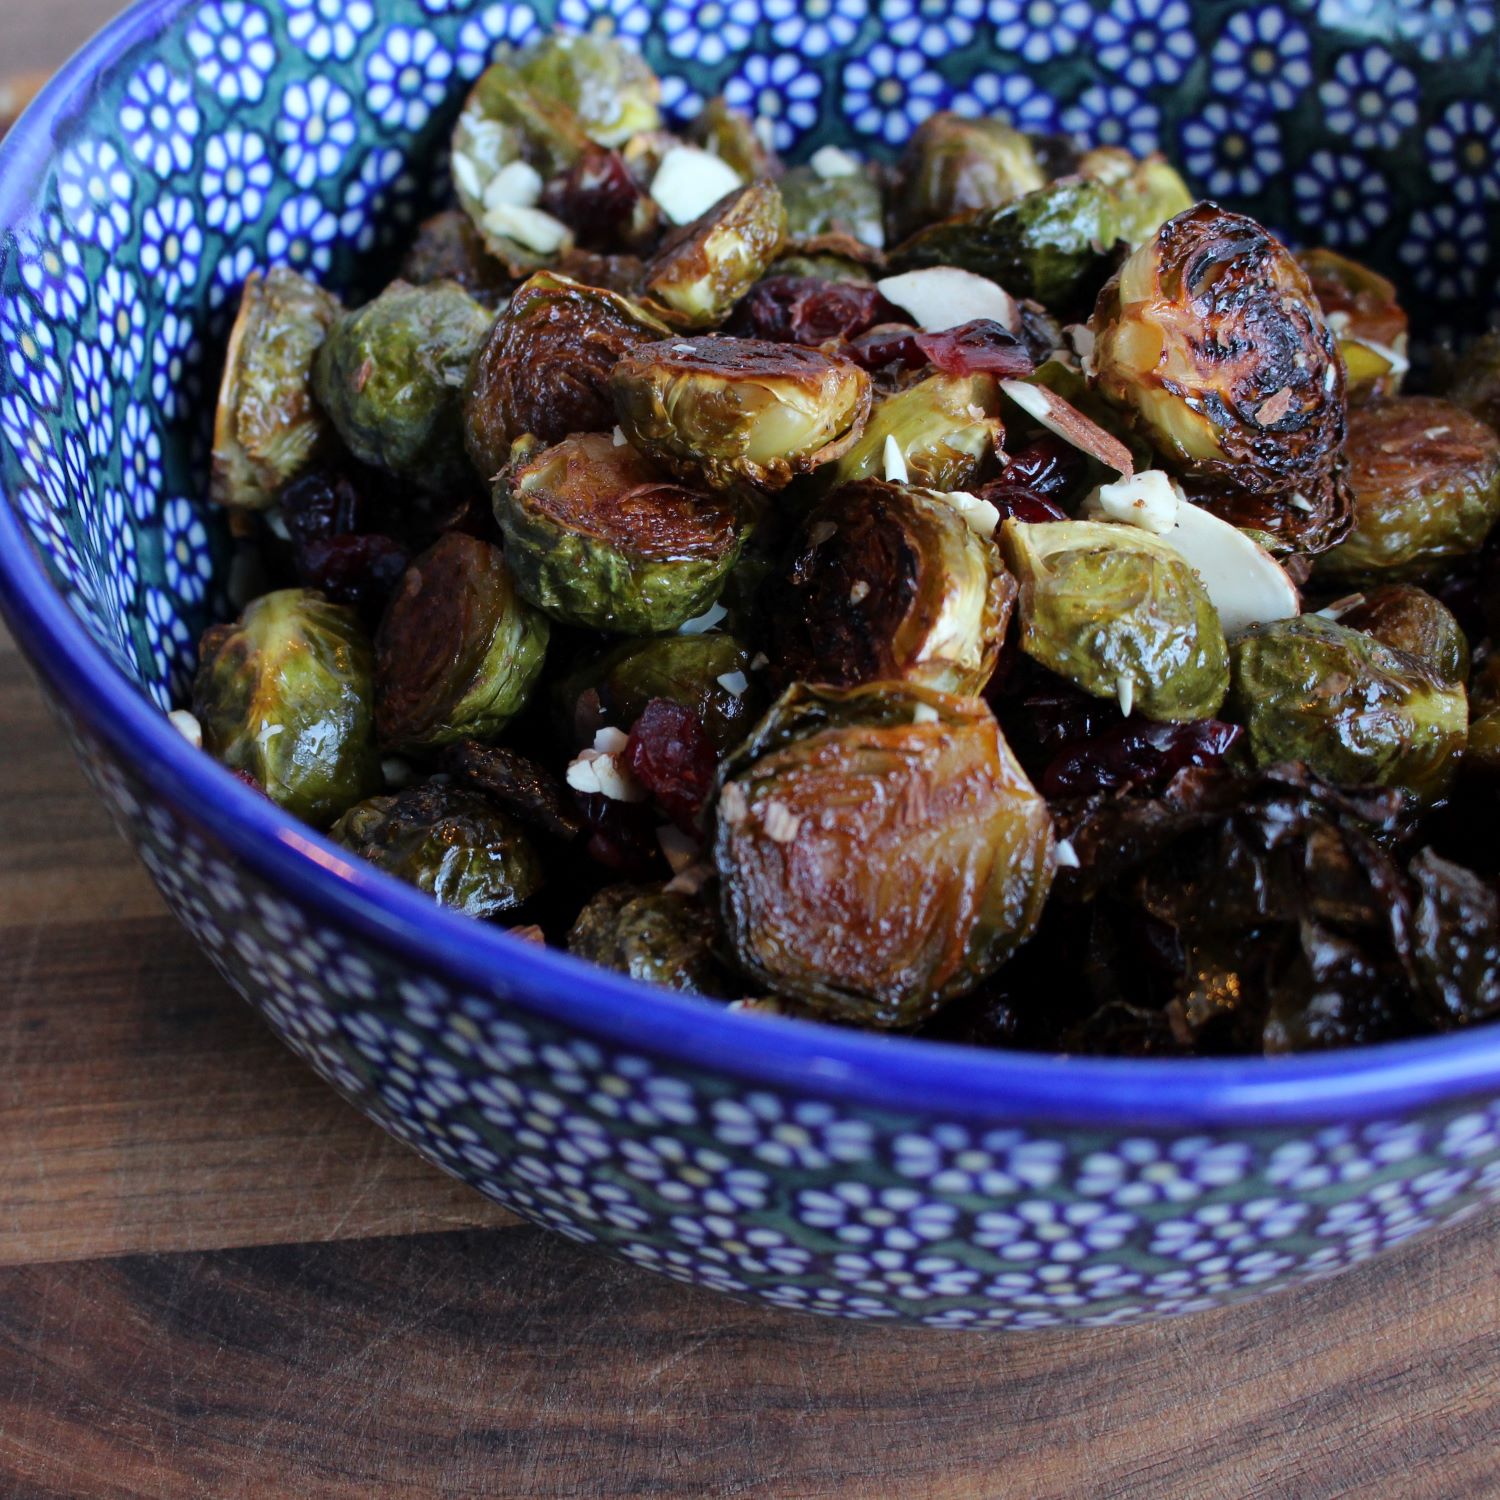 Carmelized Brussels Sprouts with sliced almonds and cranberries.